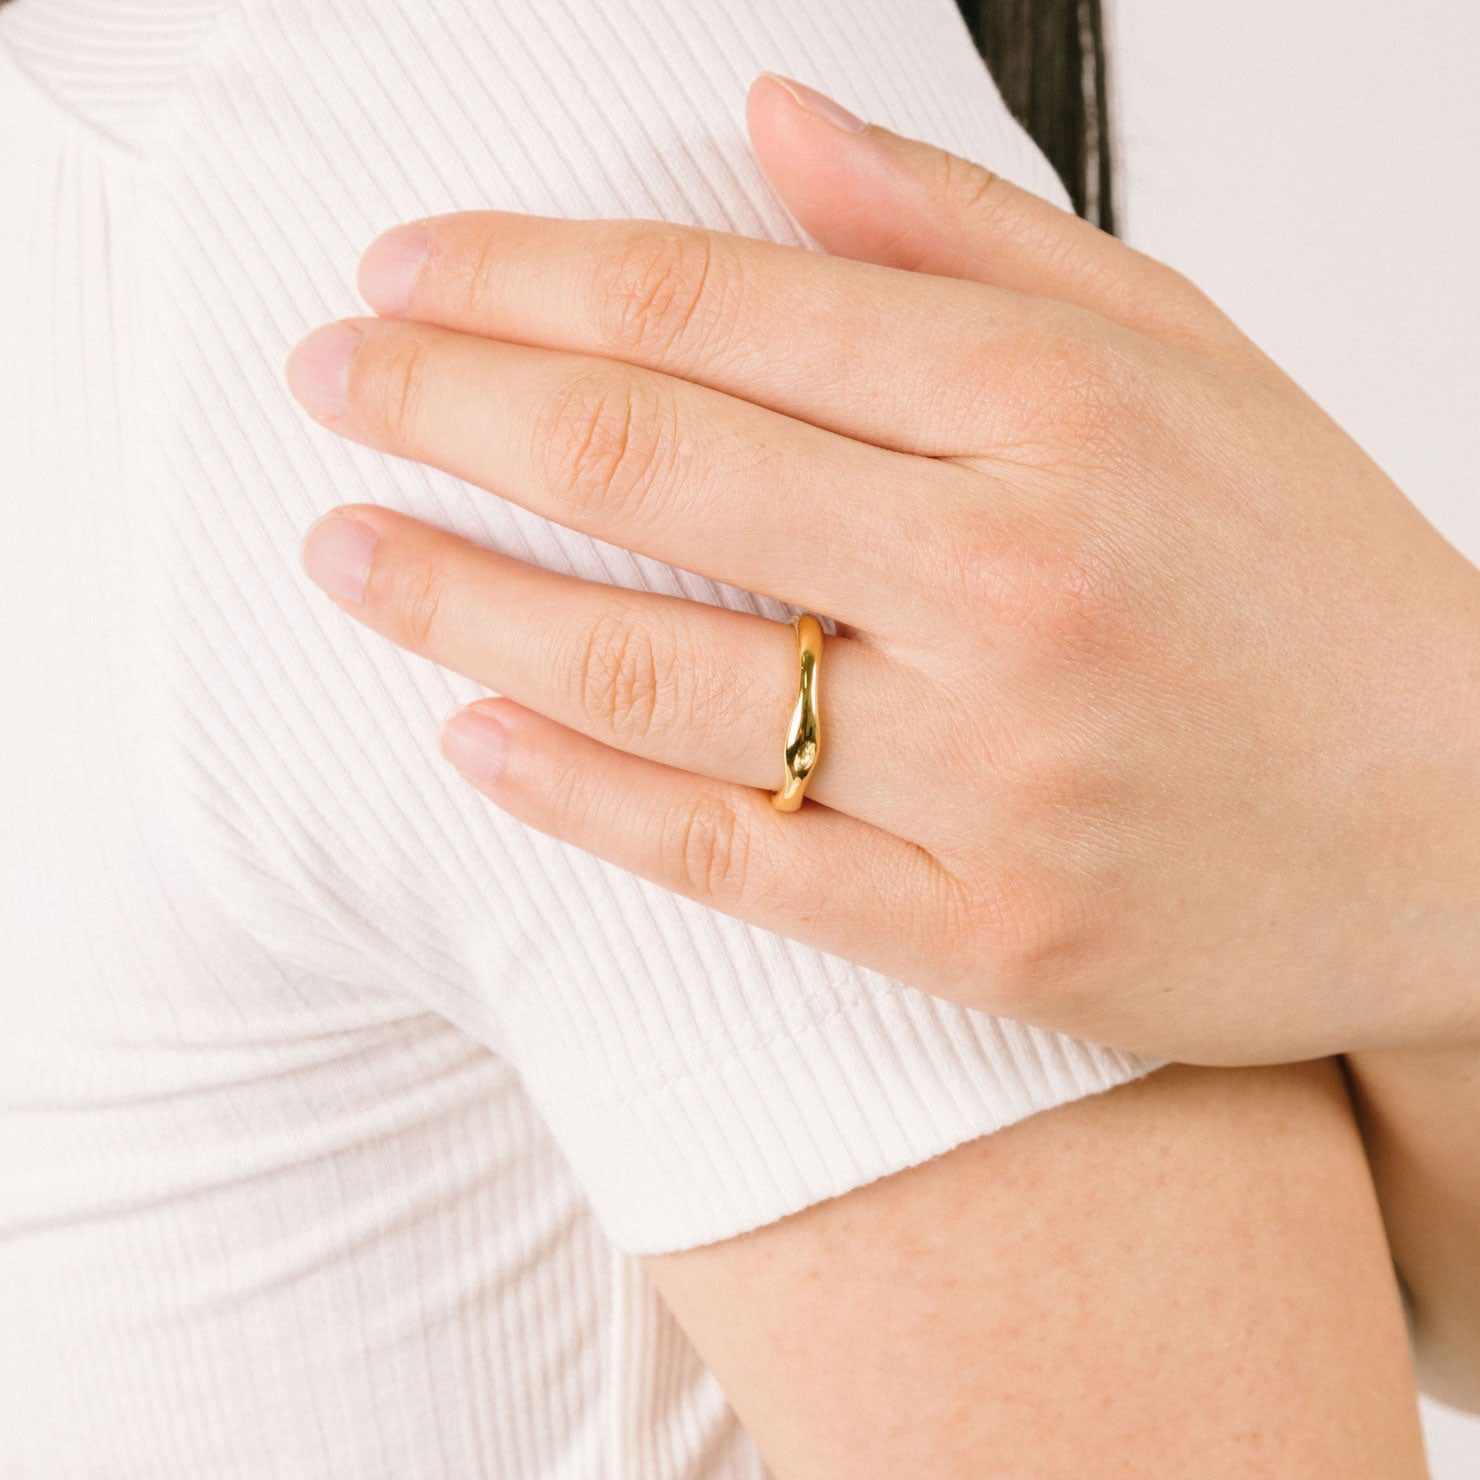 A model wearing the Organic Wave Ring offers no ability to adjust and is a single item comprised of 18K Gold Plated Stainless Steel, making it non-tarnish and water resistant.